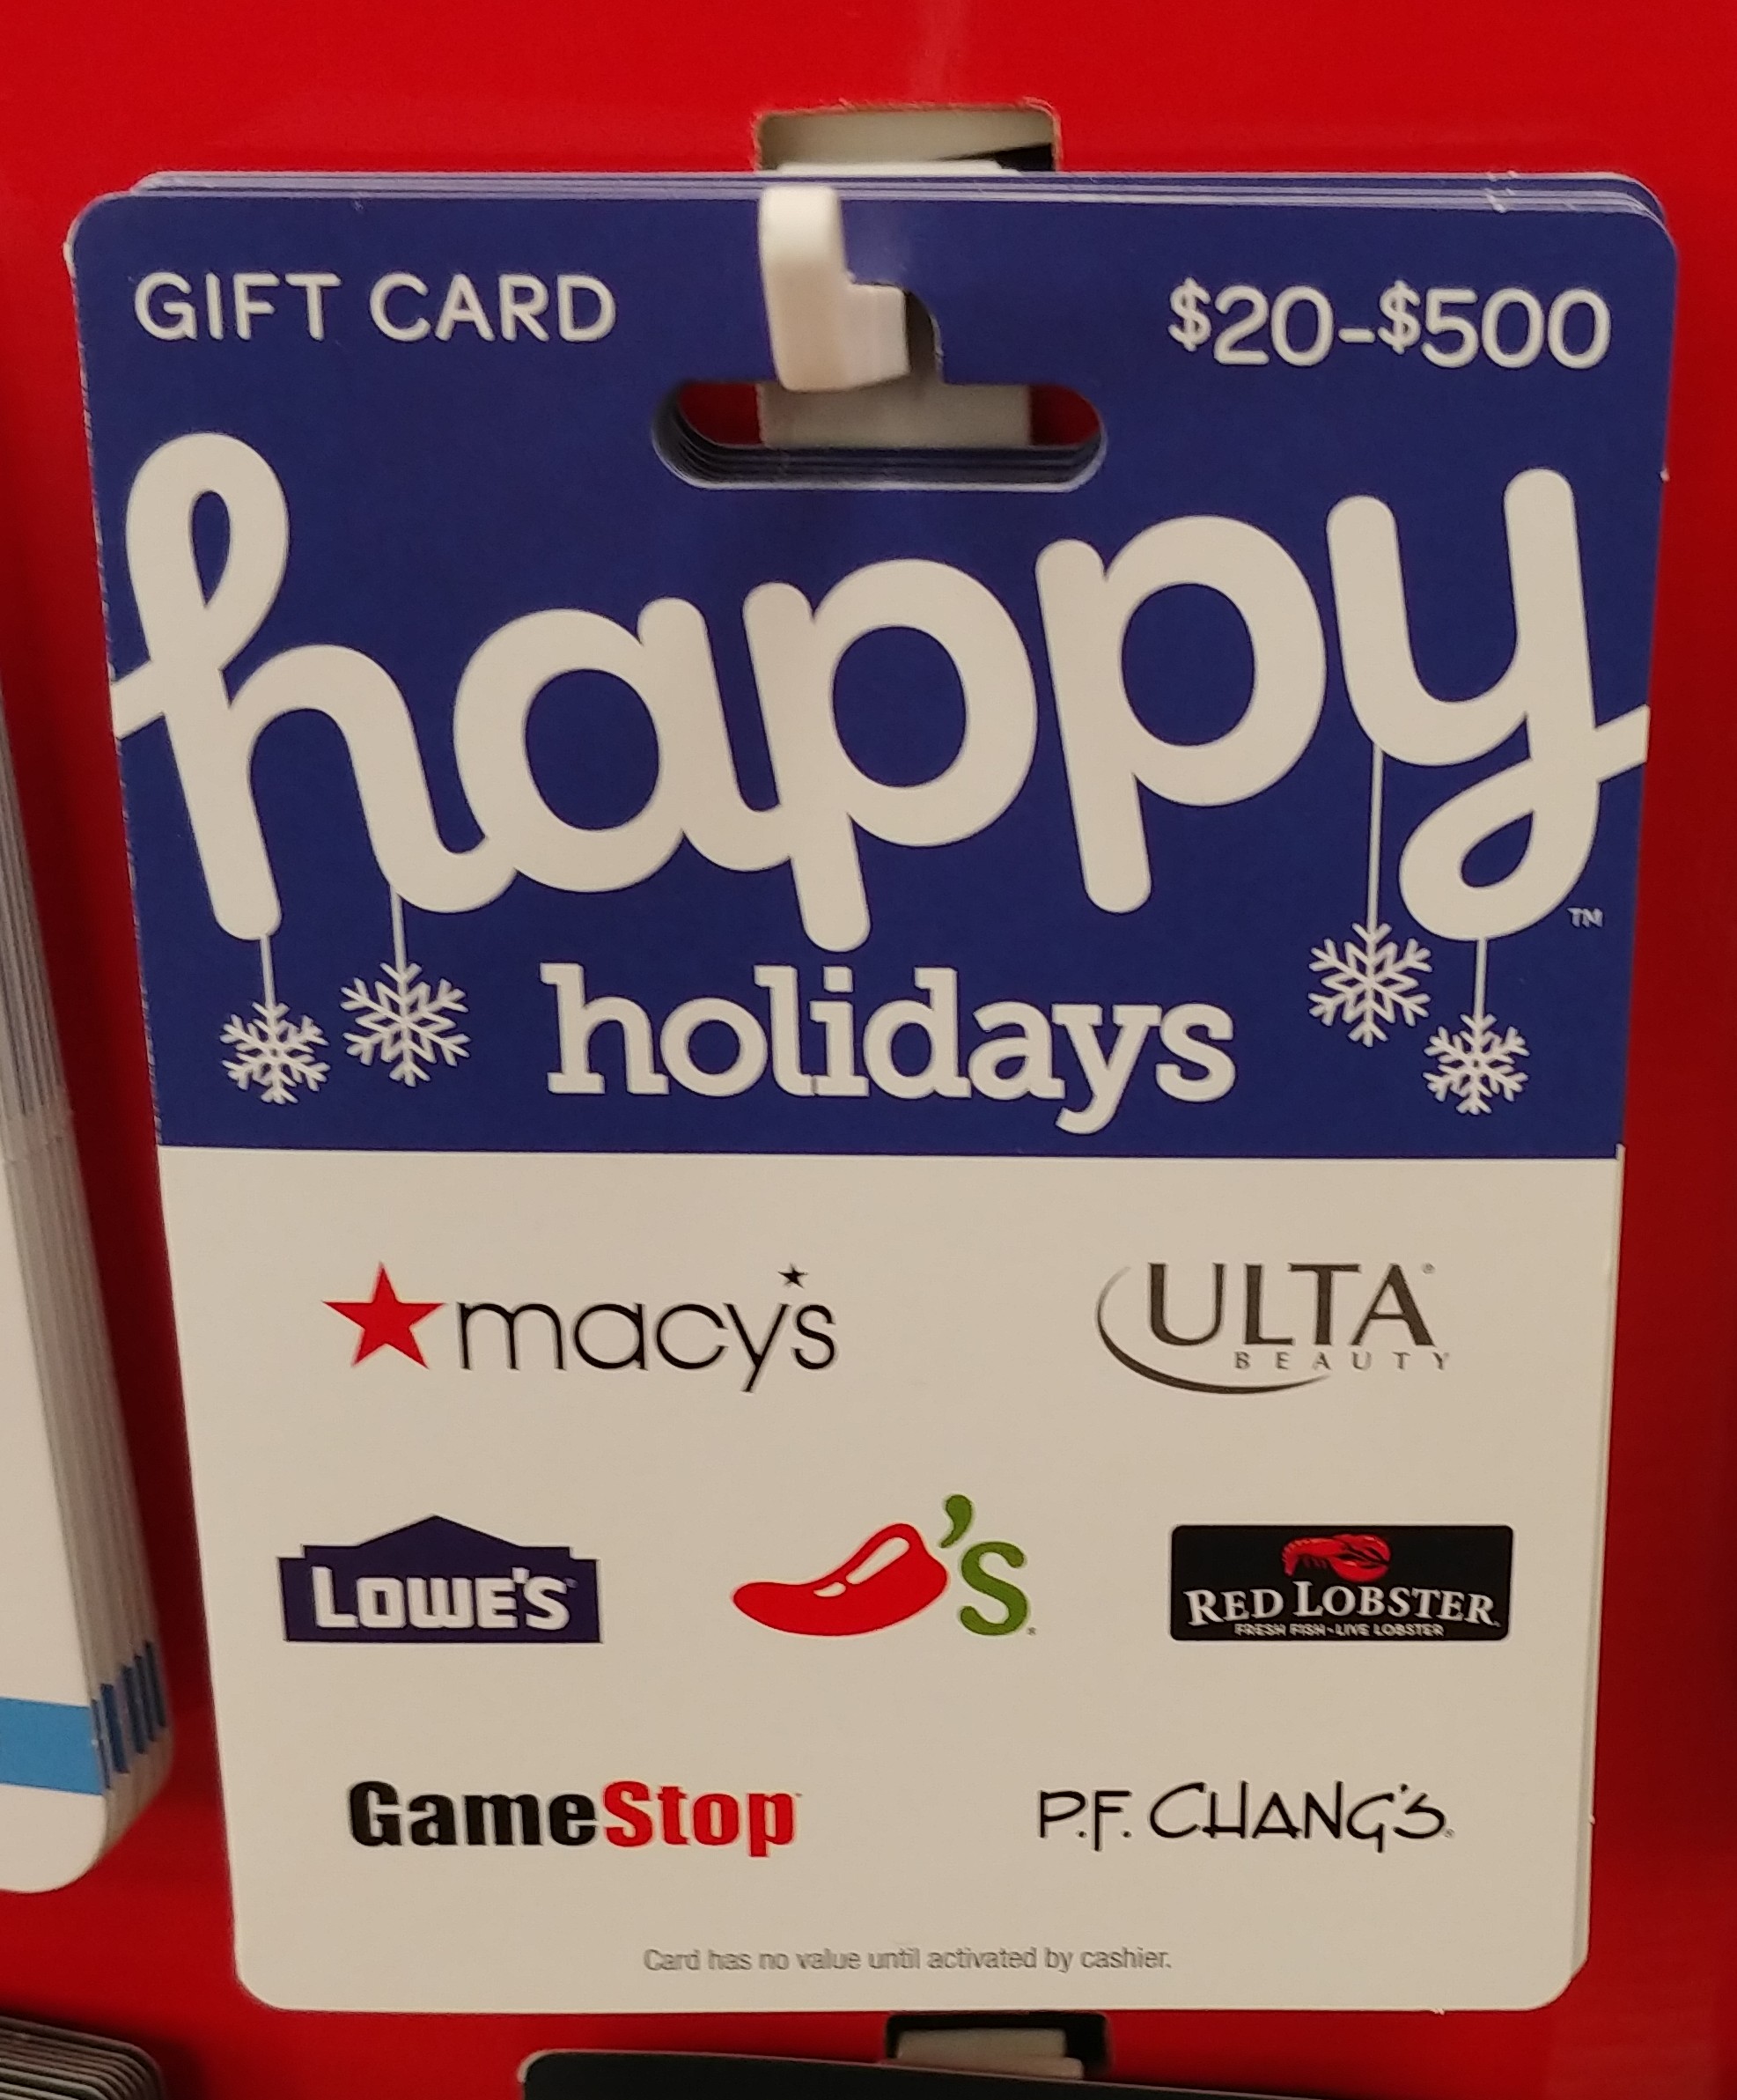 a blue and white gift card with white text